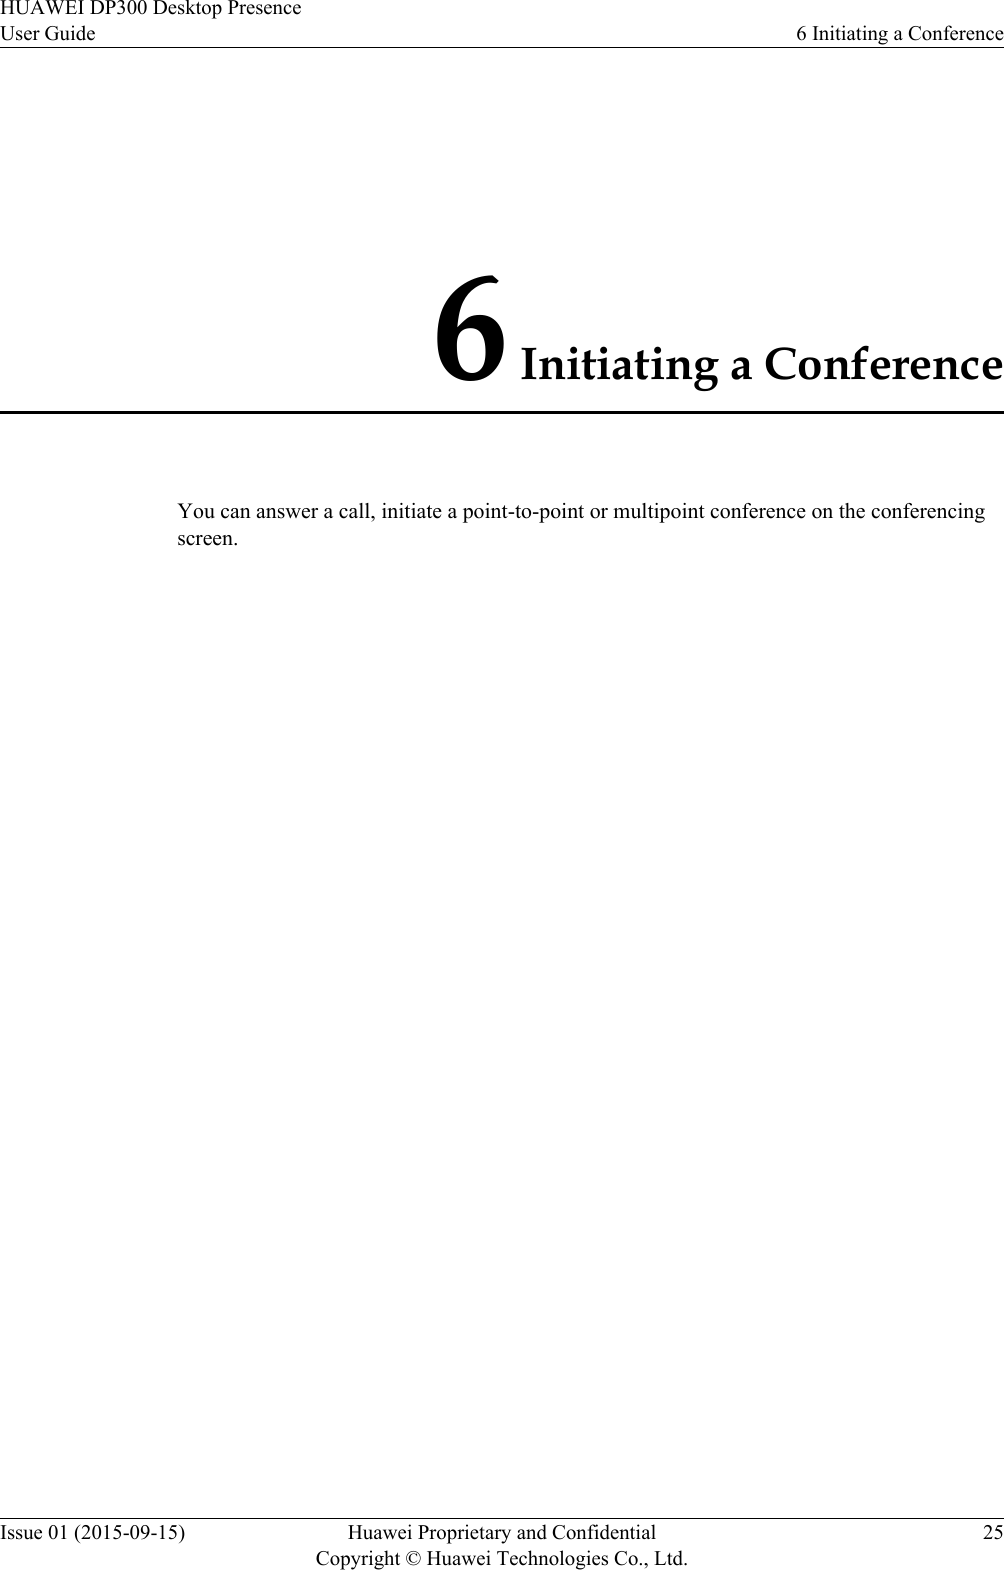 6 Initiating a ConferenceYou can answer a call, initiate a point-to-point or multipoint conference on the conferencingscreen.HUAWEI DP300 Desktop PresenceUser Guide 6 Initiating a ConferenceIssue 01 (2015-09-15) Huawei Proprietary and ConfidentialCopyright © Huawei Technologies Co., Ltd.25